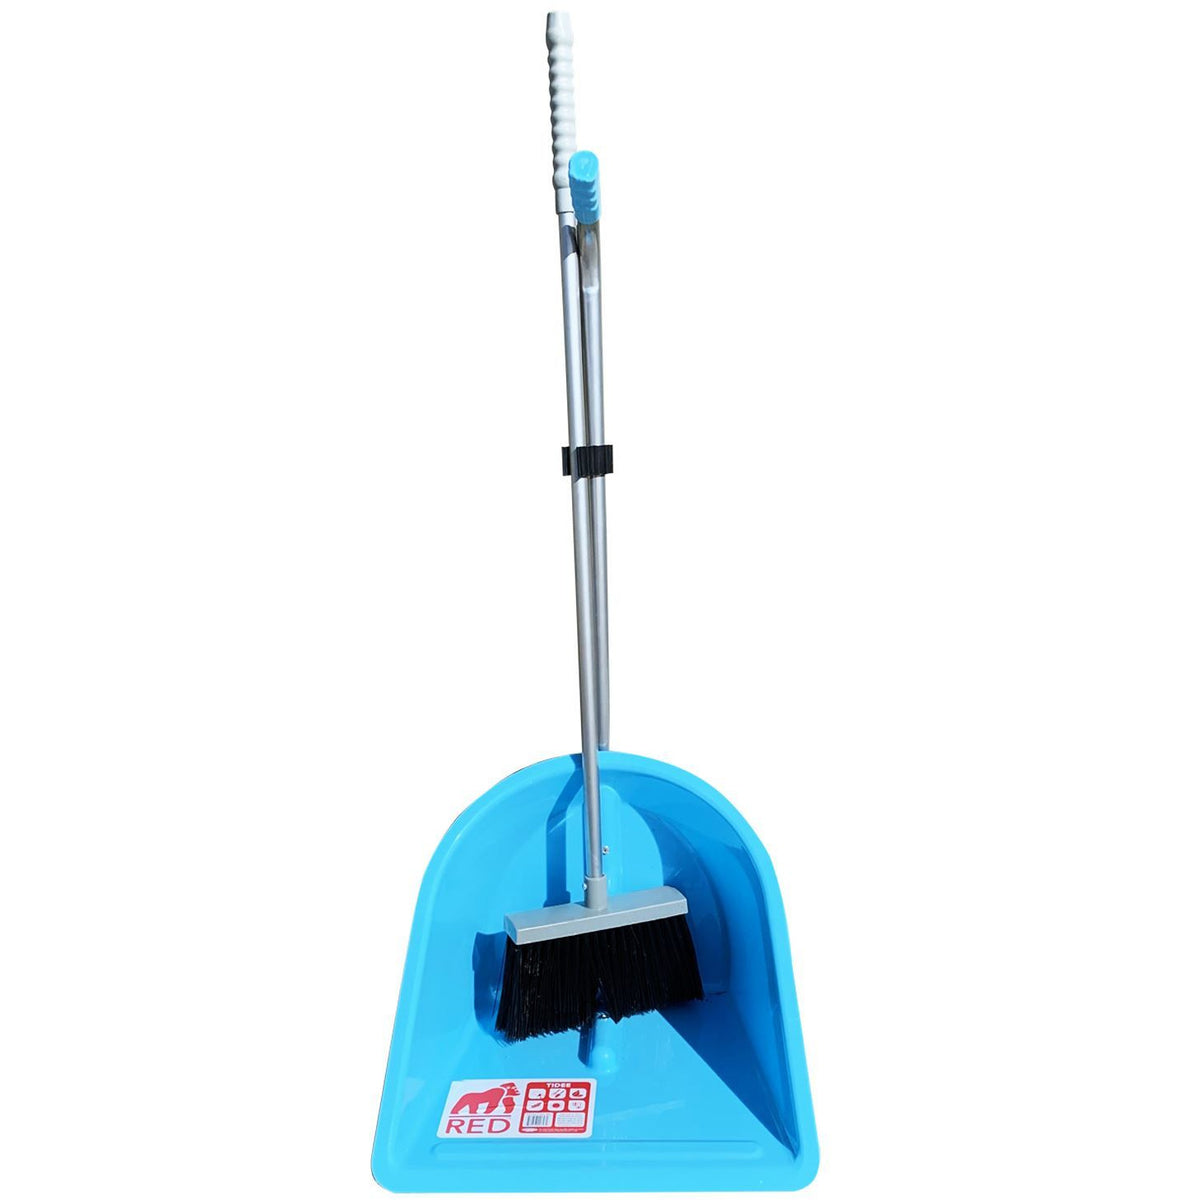 Long Handled Outdoor Dustpan and Brush, Garden Scoop Long Handled and Broom